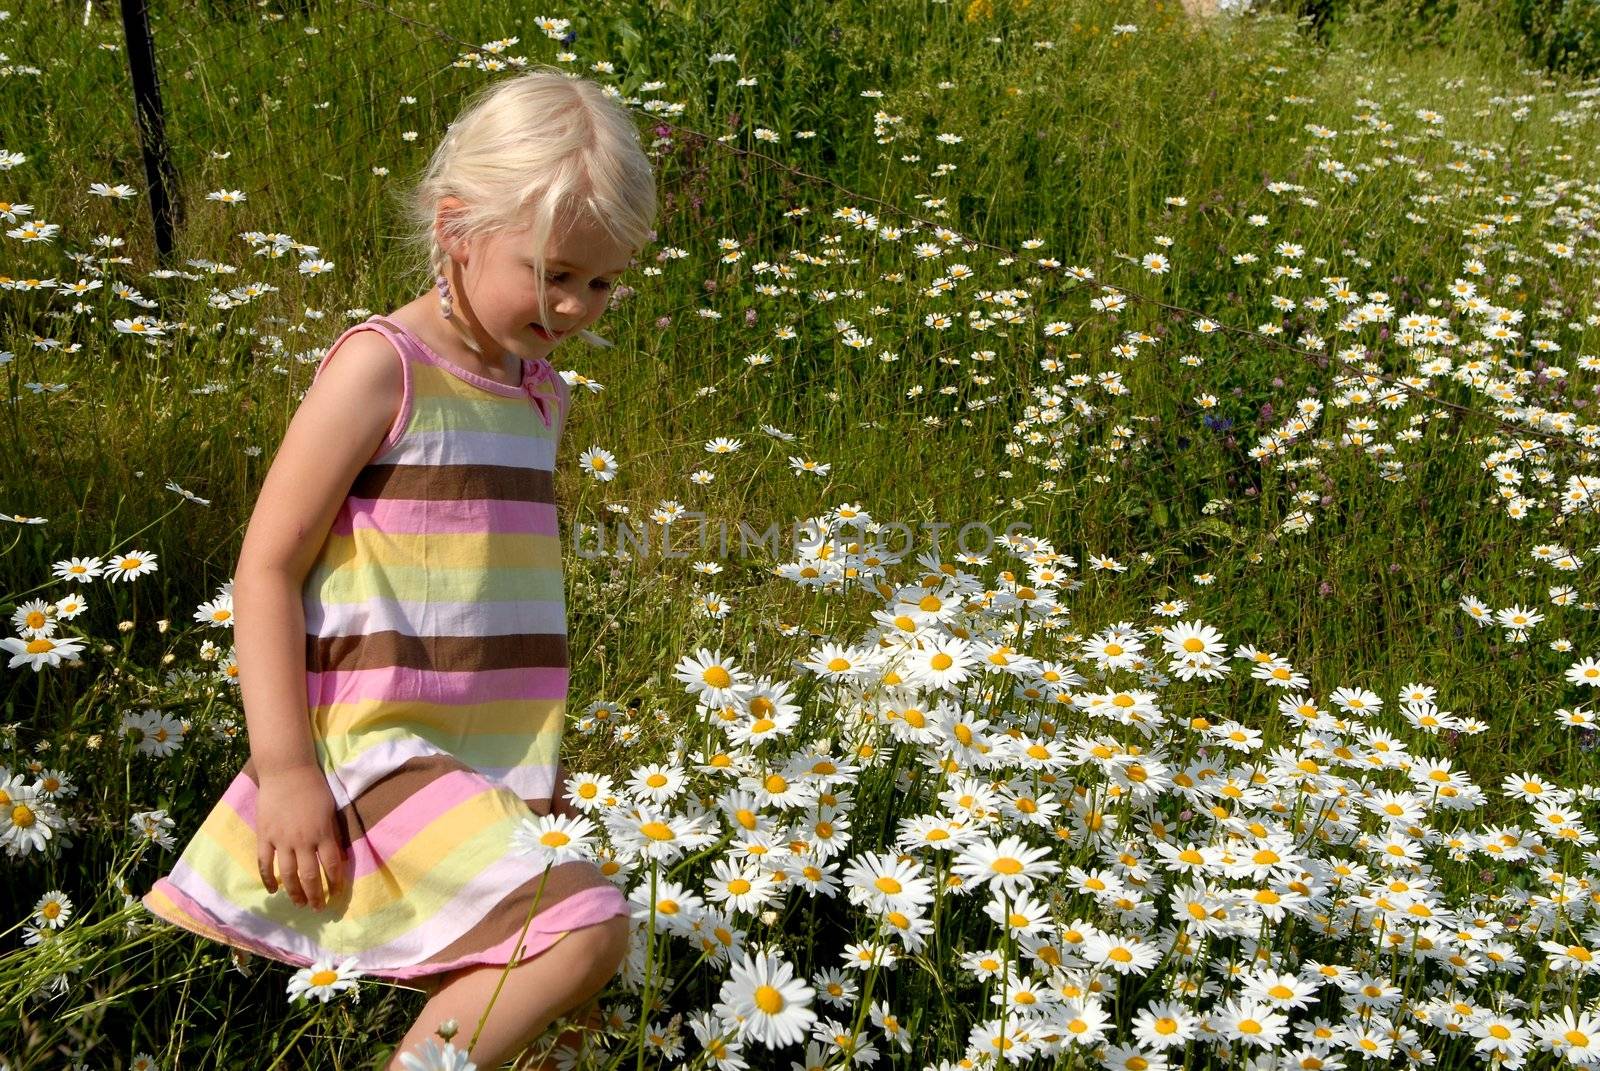 happy girl in the garden. Please note: No negative use allowed.